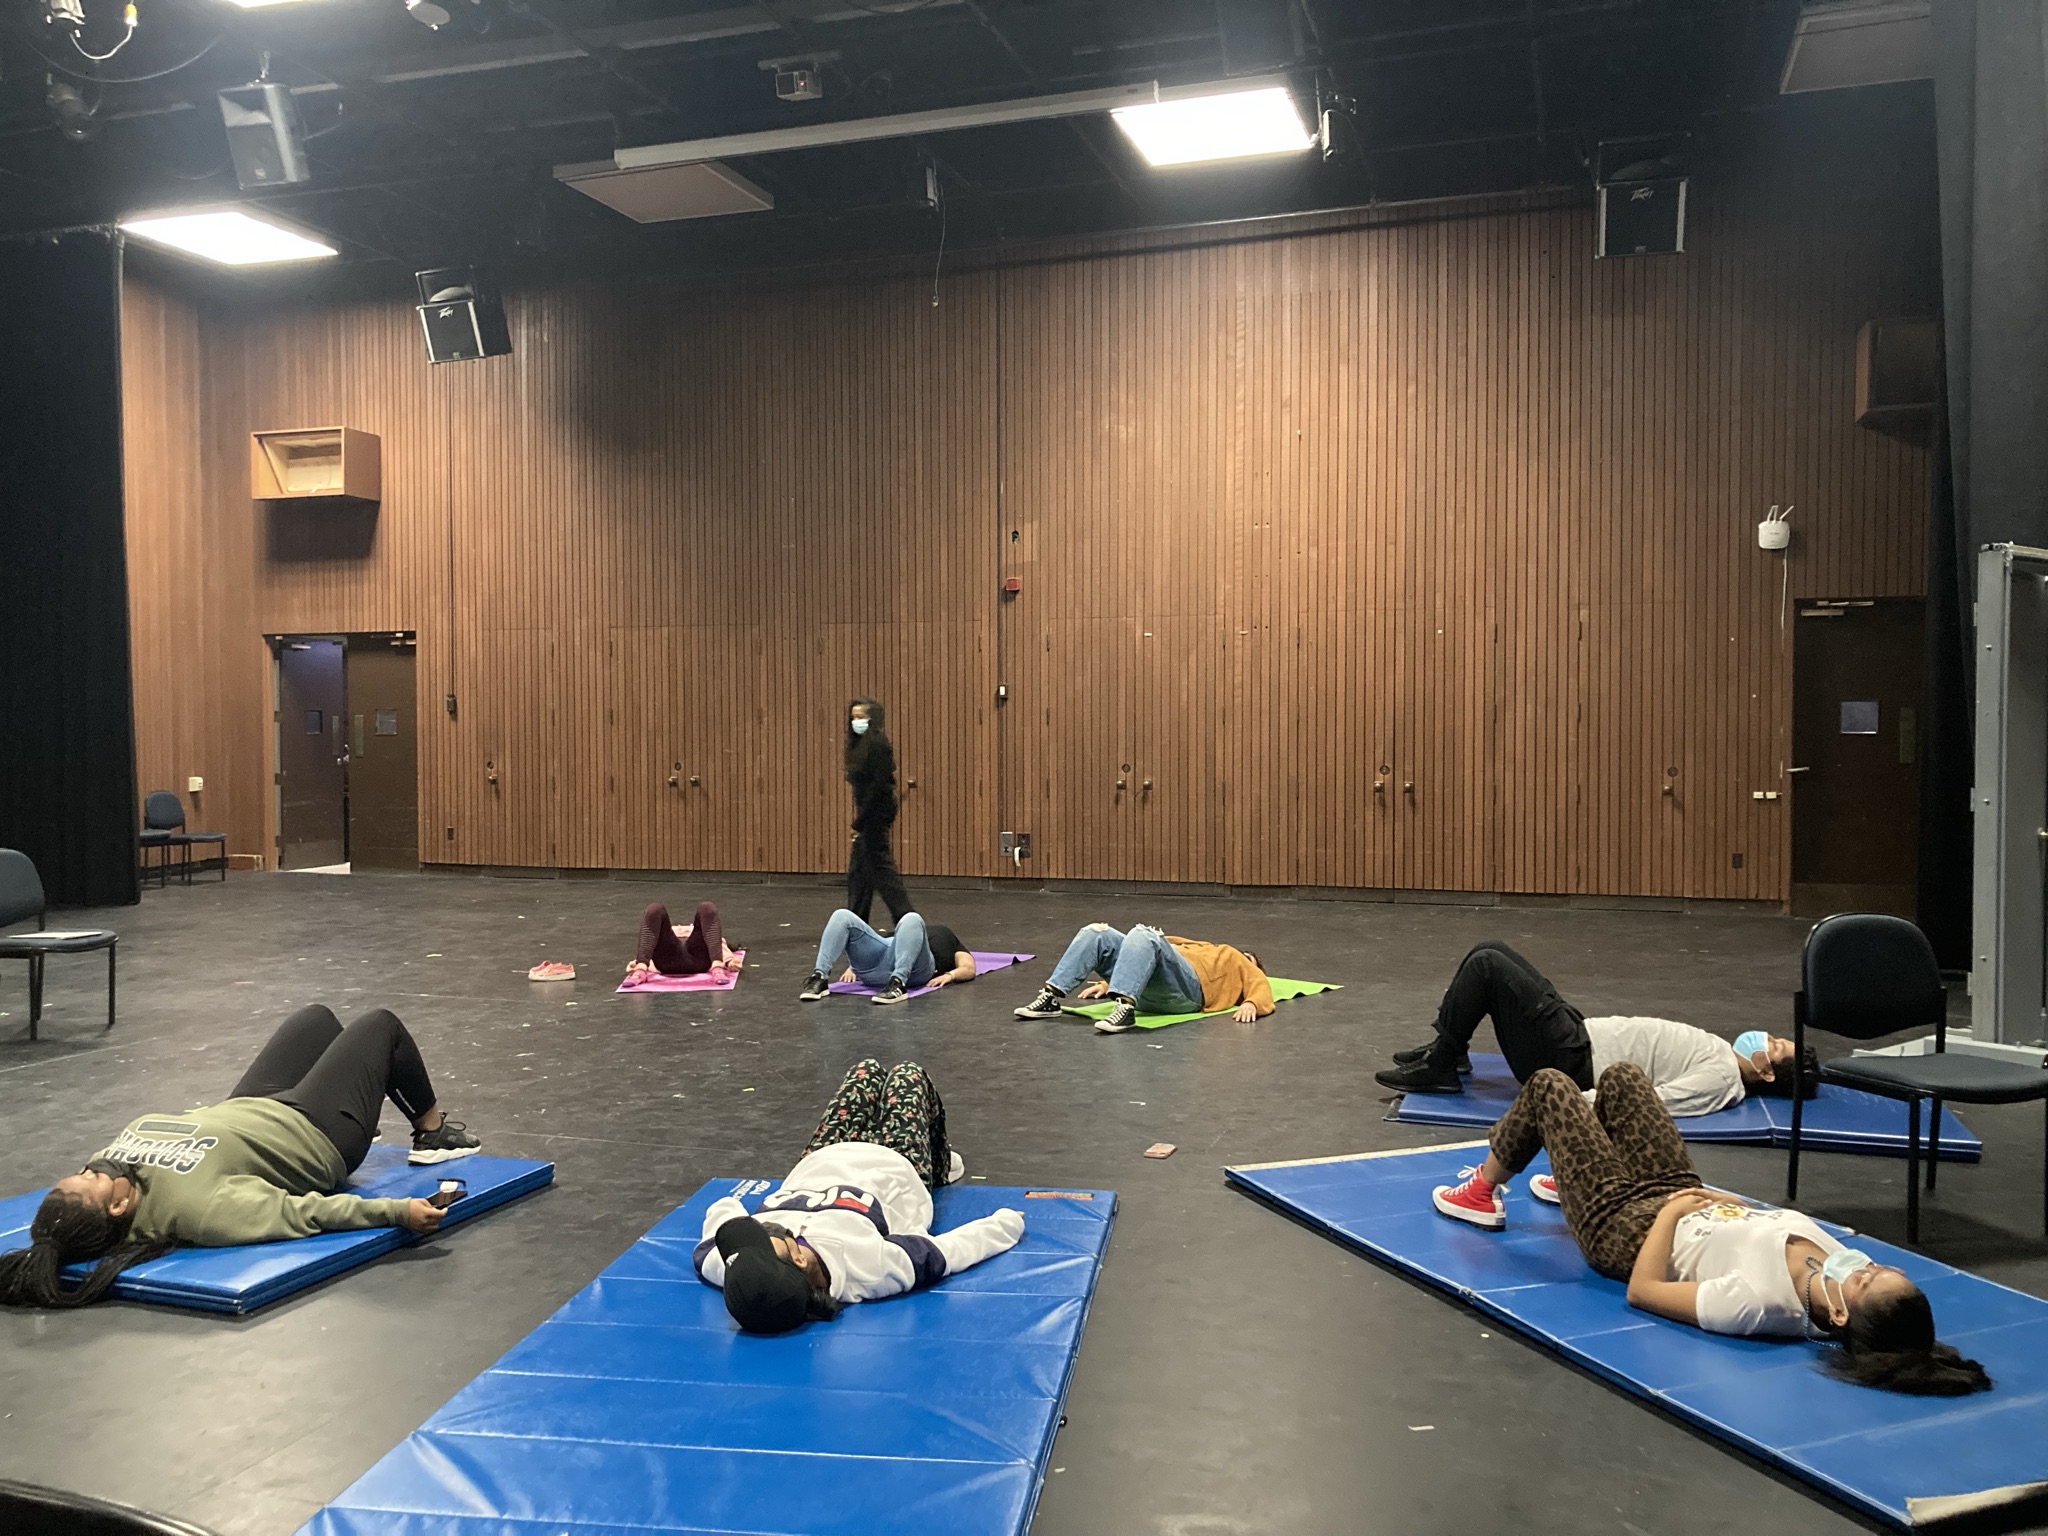 Students laying down on mats